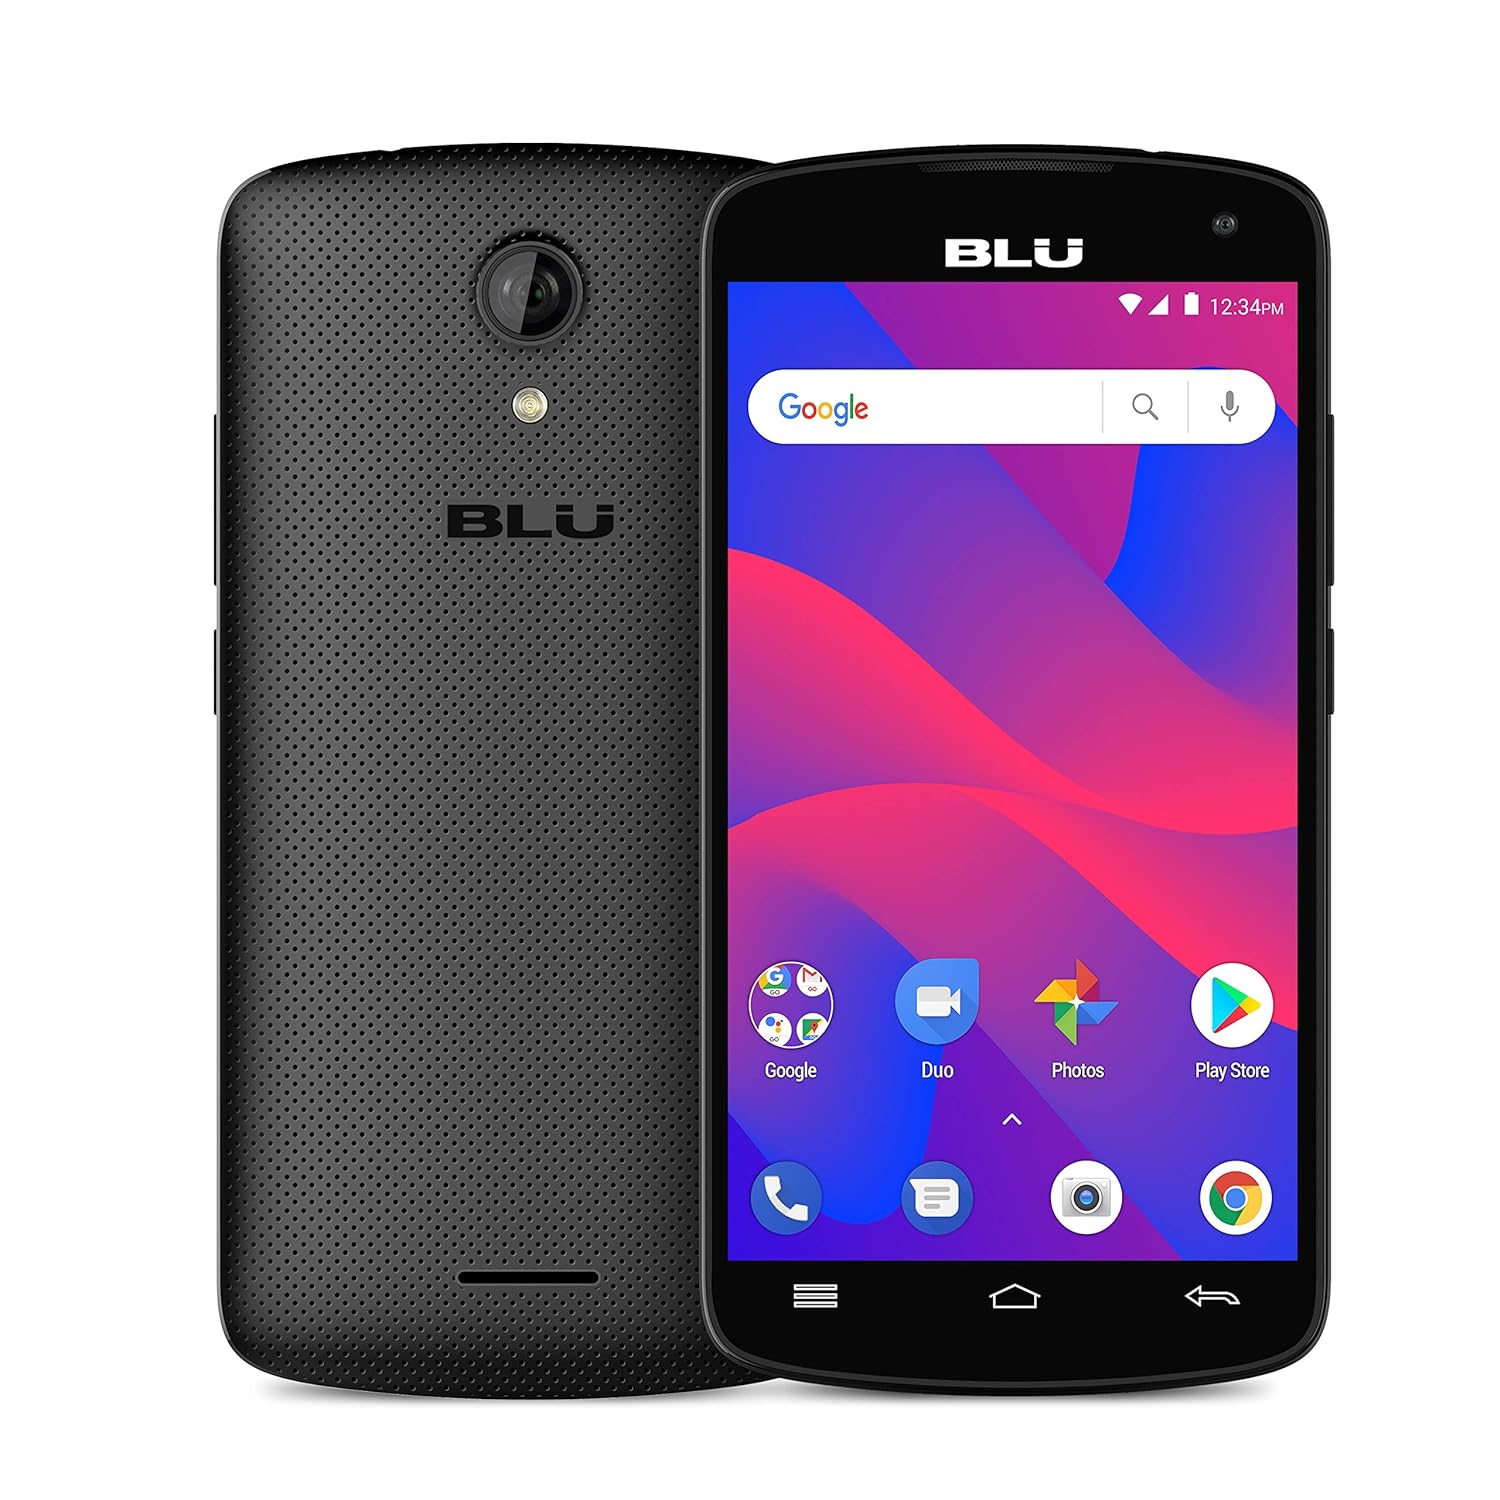 The Ultimate Guide How to Reset Your BLU Smartphone or Tablet Easily